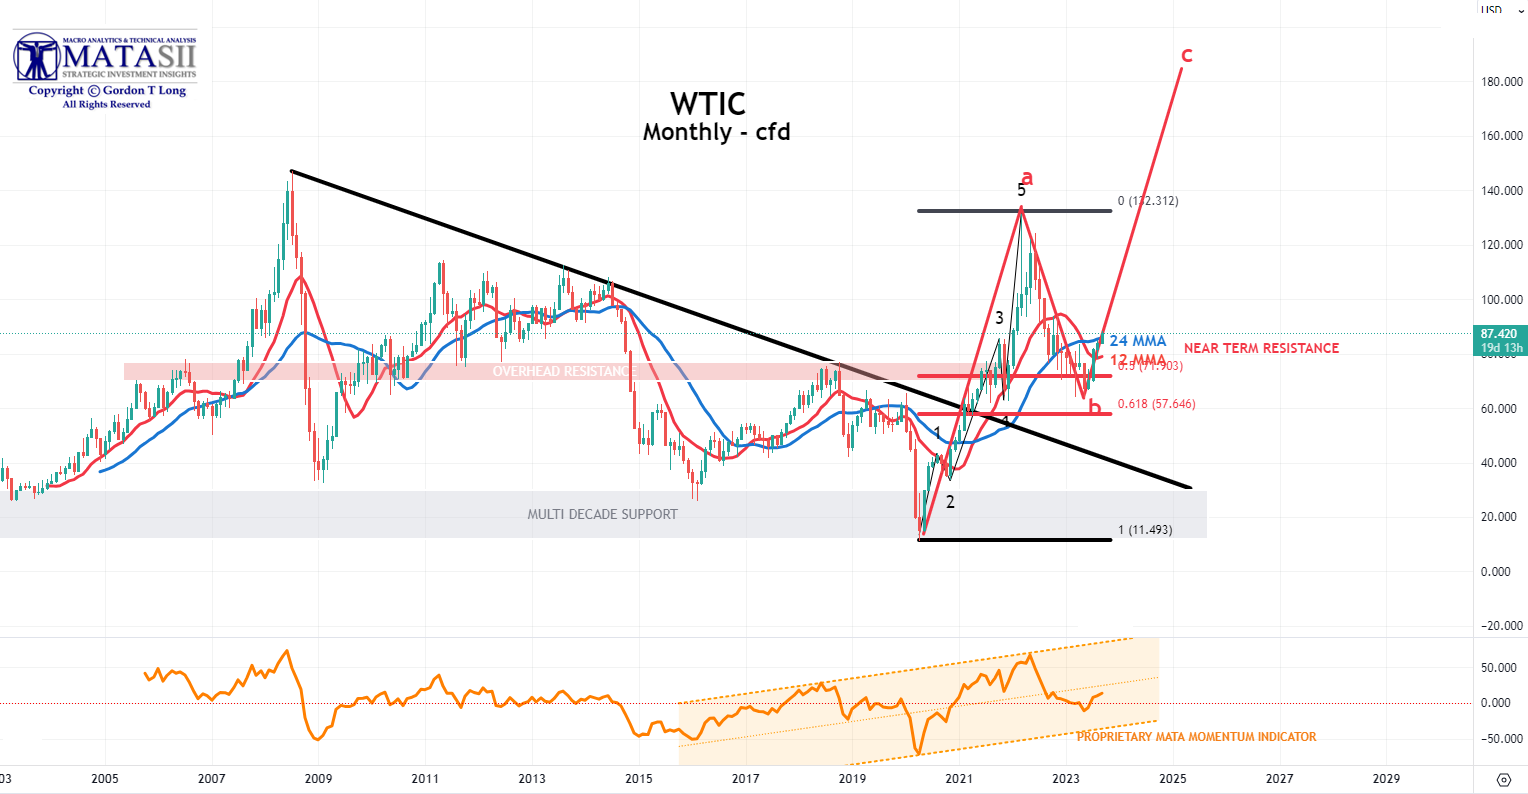 LONGWave-09-06-23-SEPTEMBER-Why-Are-Central-Banks-Buying-Gold-Newsletter-2-WTIC-Monthly image